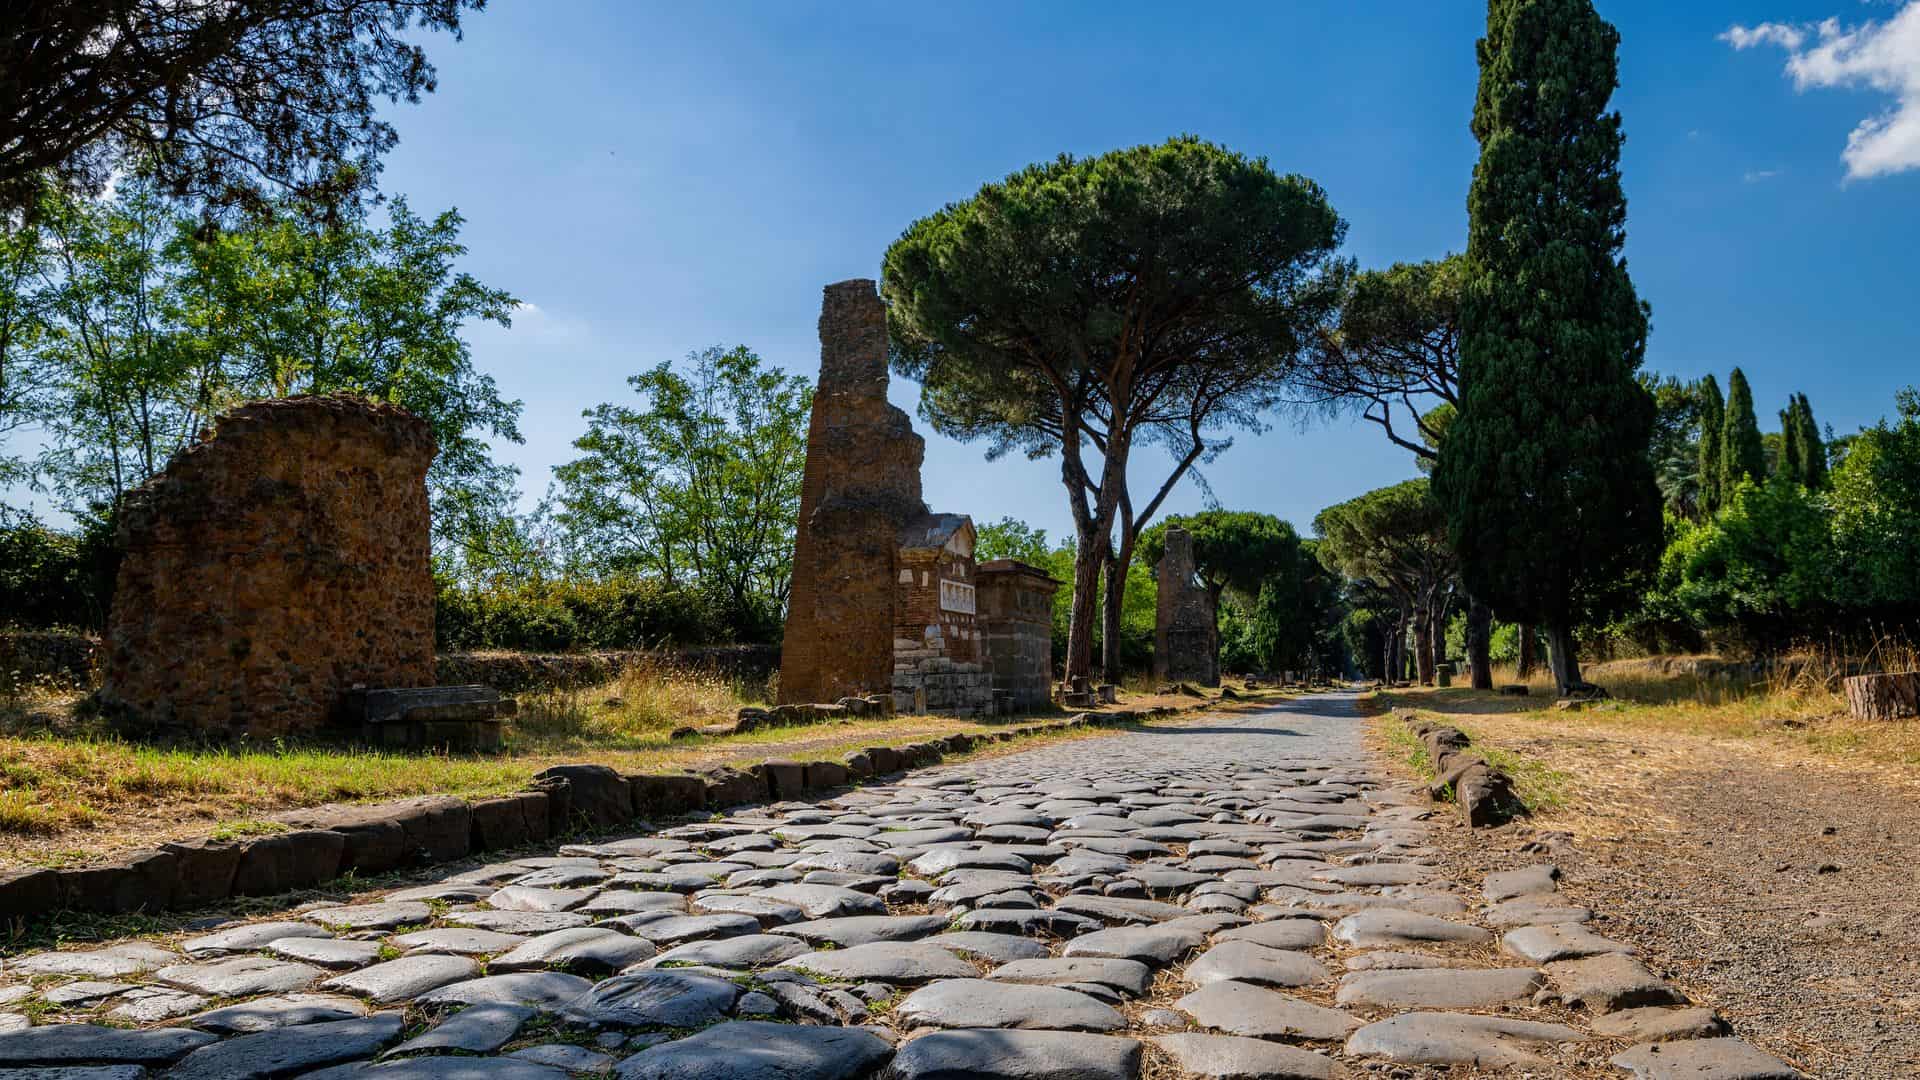 The ancient Roman cobbled street known as the Appian Way.